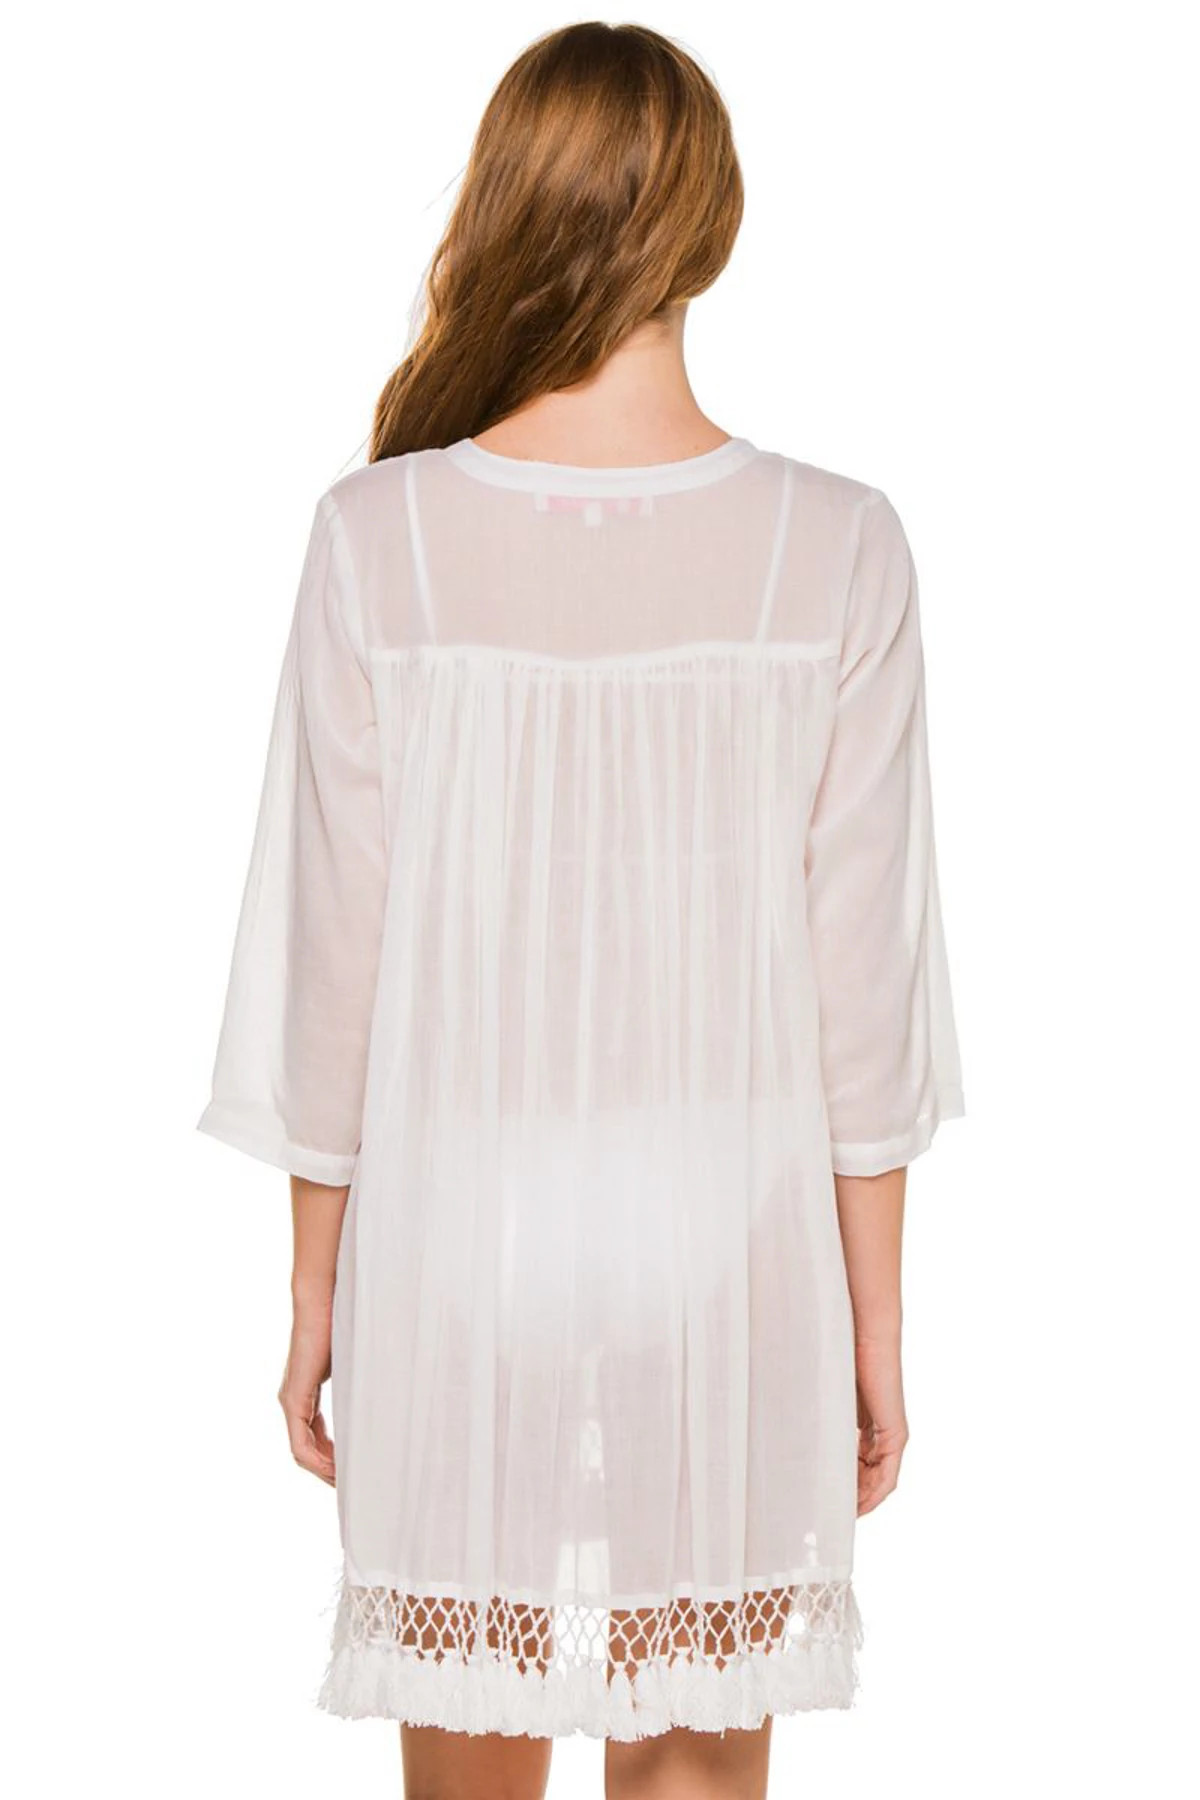 WHITE Seychelle Tie Front Sheer Tunic image number 2